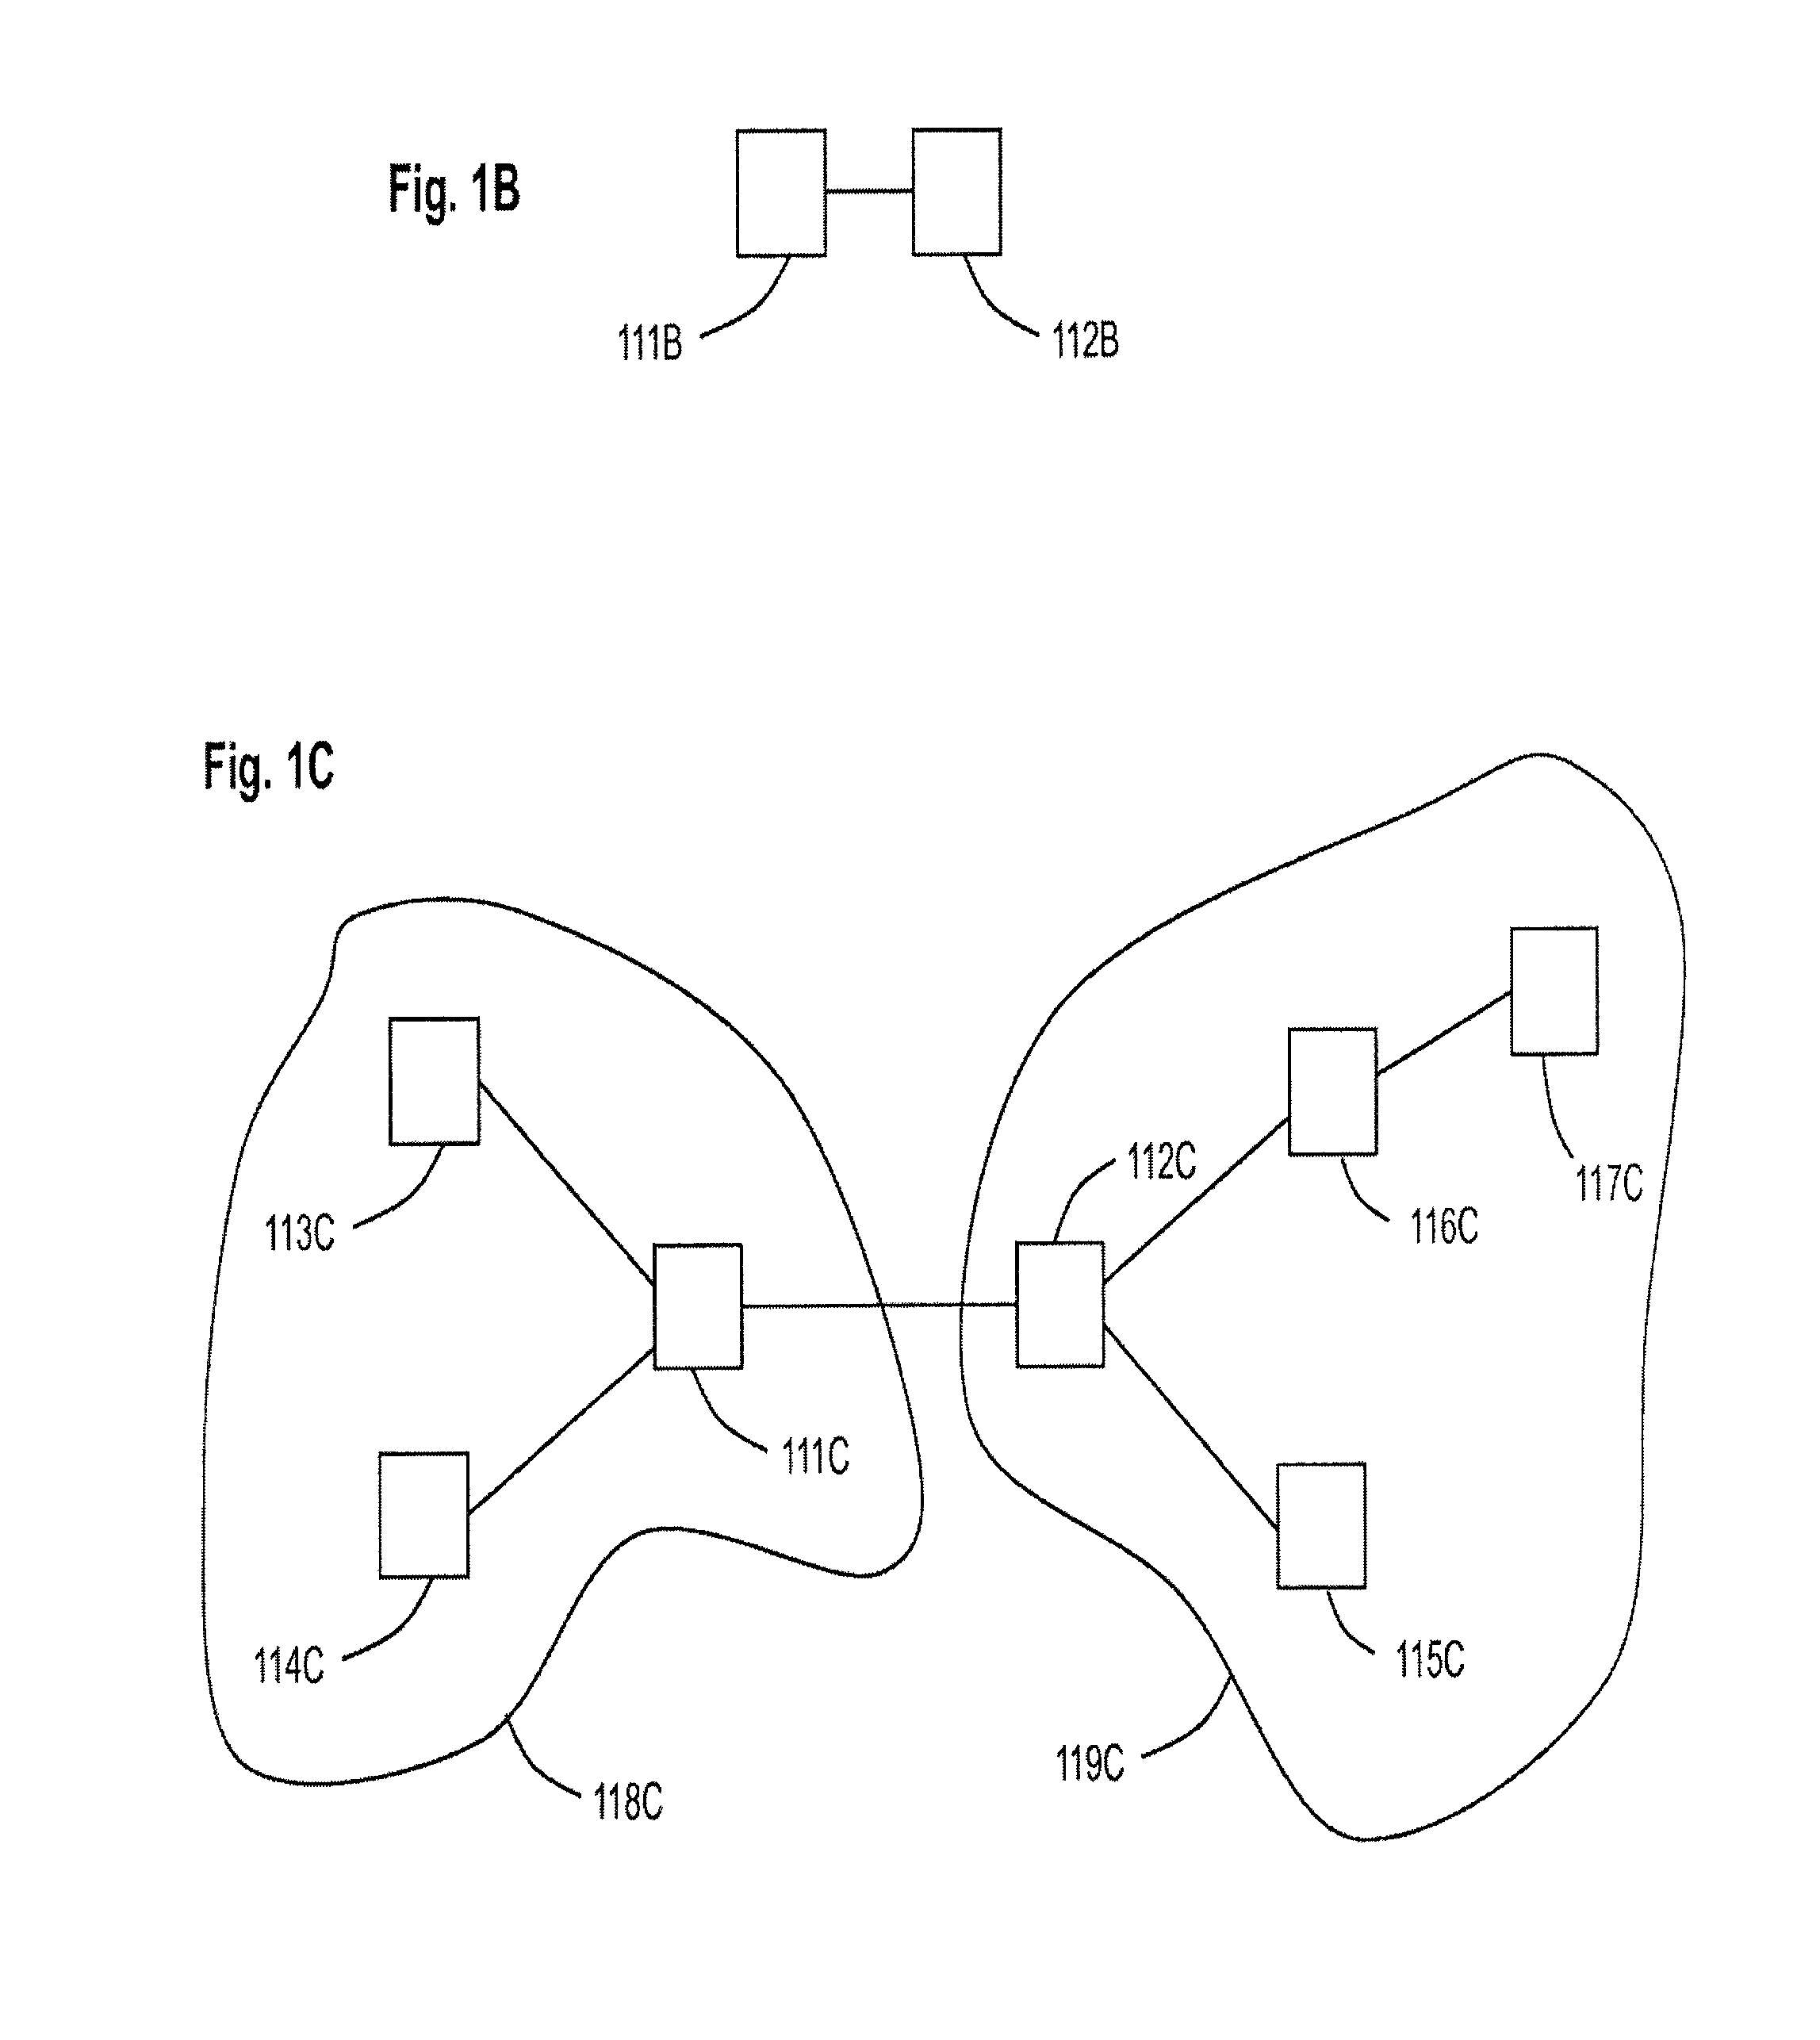 System and method of multi-endpoint data conferencing